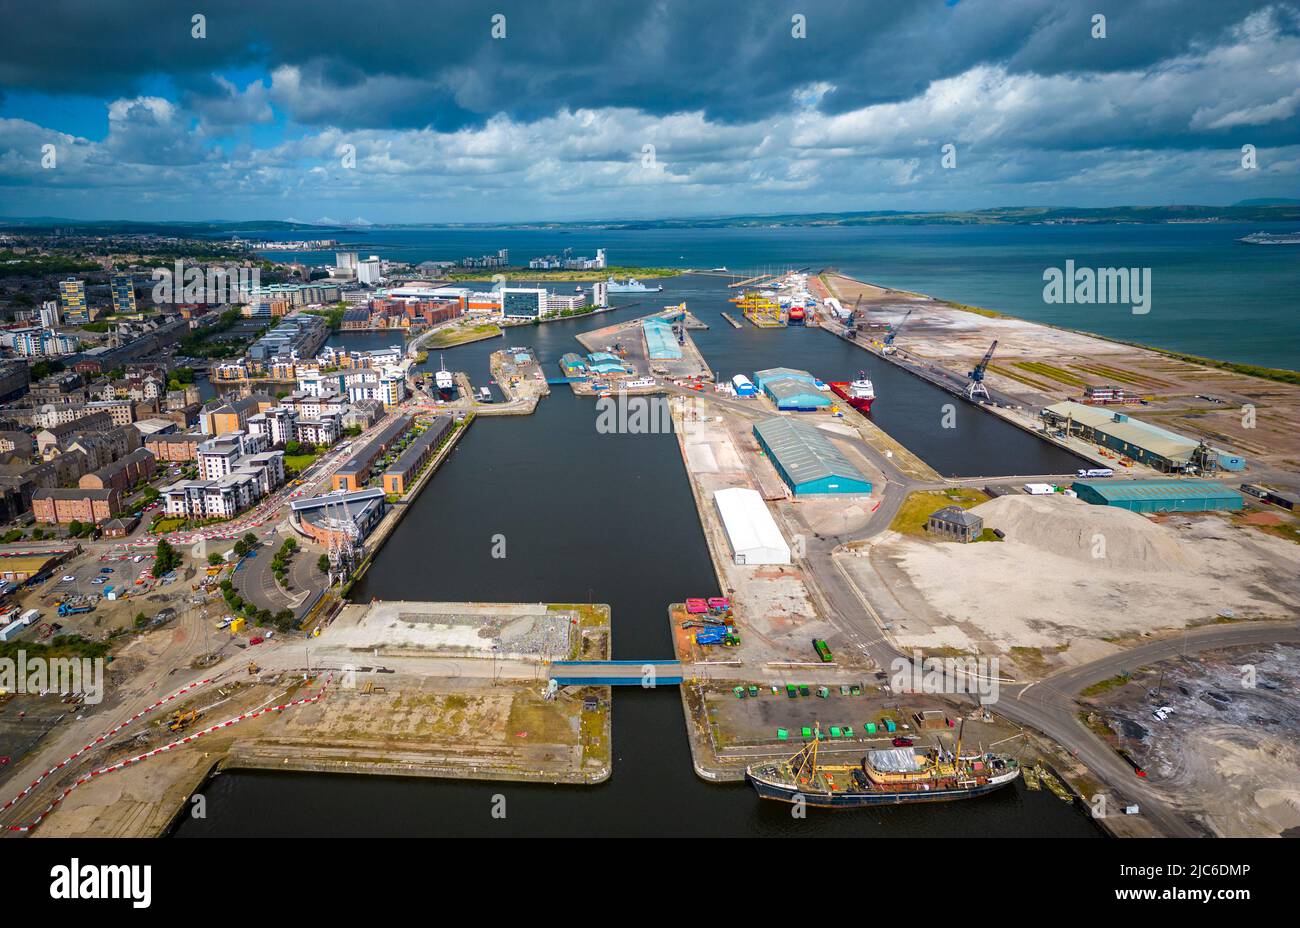 Leith, Scotland, UK. 10 June 2022. Aerial general view of Fort Ports site on the Firth of Forth at Leith. Forth Ports are one of the candidates bidding to become one of Scotland’s first two green Freeports. The successful Freeports are expected to generate billions of pounds of investment and create thousands of jobs.  Iain Masterton/Alamy Live News Stock Photo